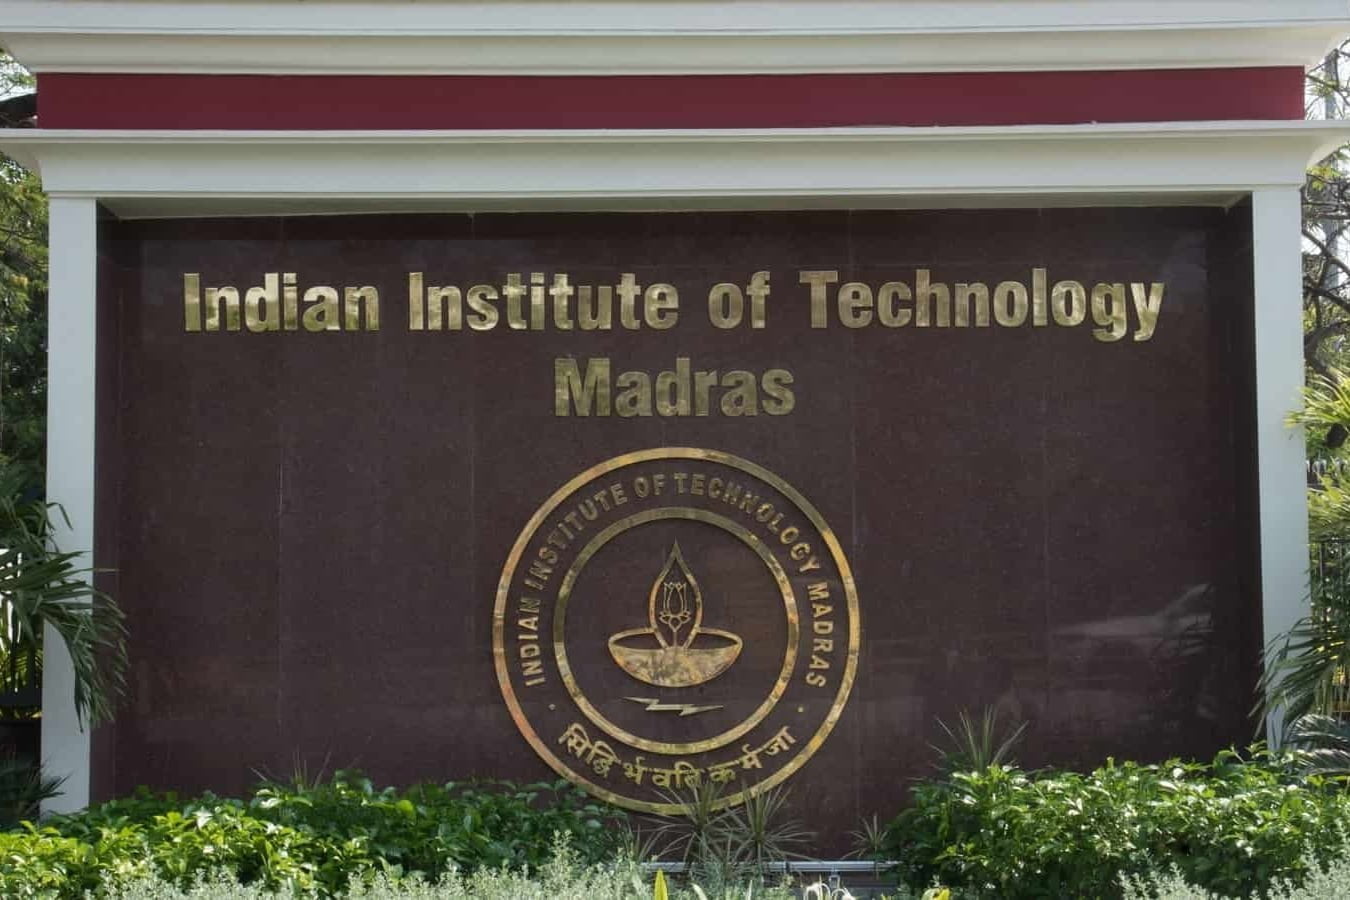 IIT Madras to provide Rs 100 crore fund in support of startups and innovations